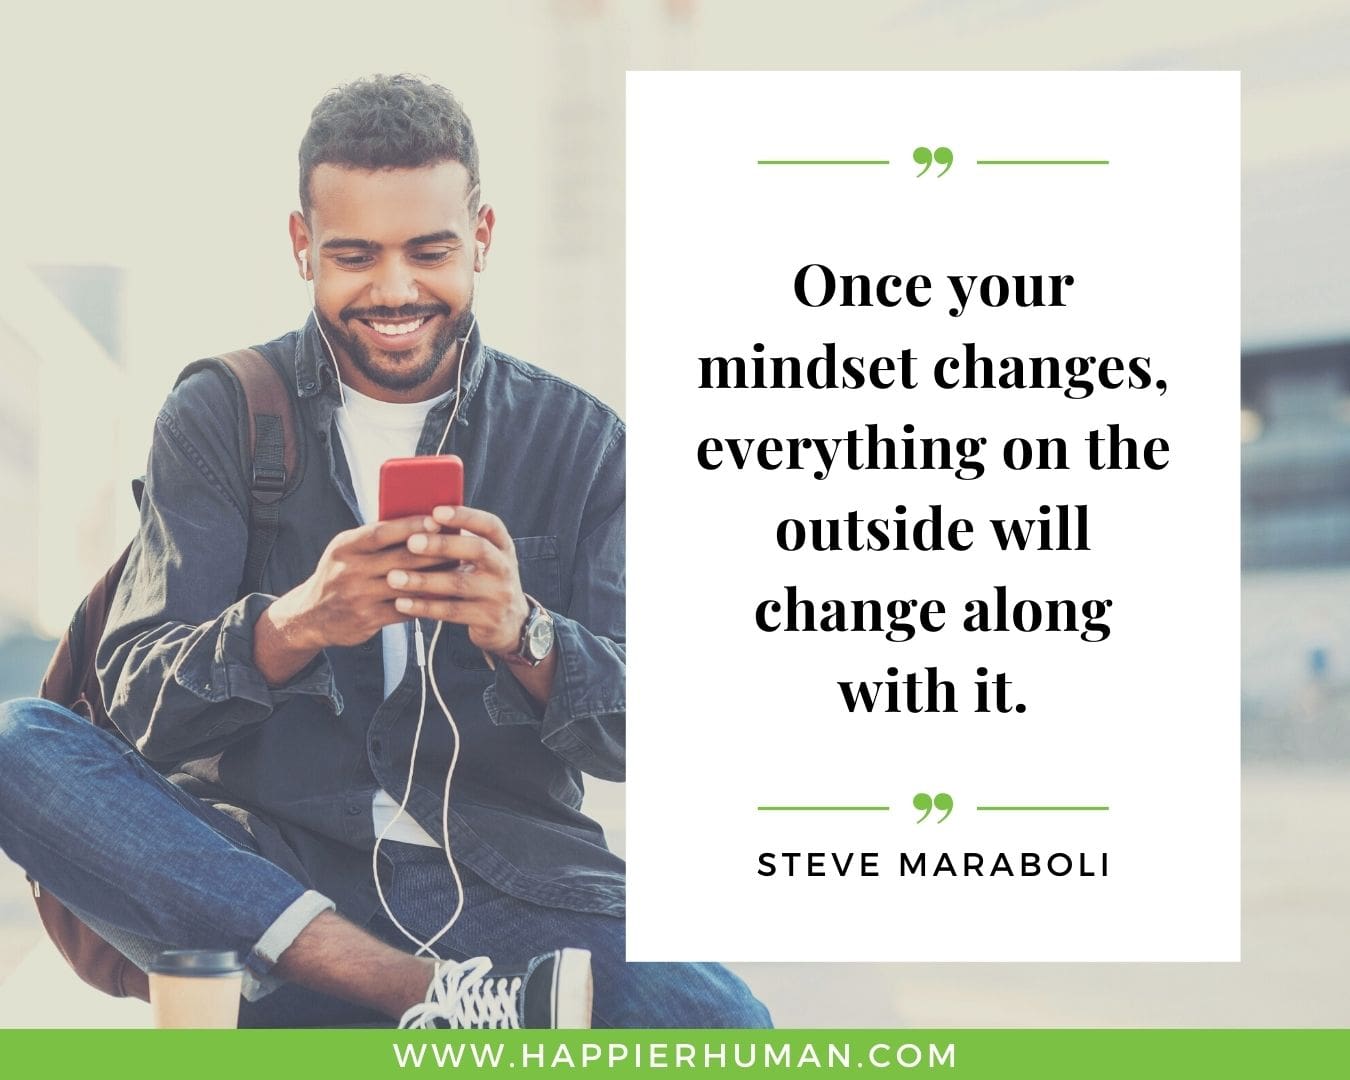 Positive Energy Quotes - “Once your mindset changes, everything on the outside will change along with it.” - Steve Maraboli